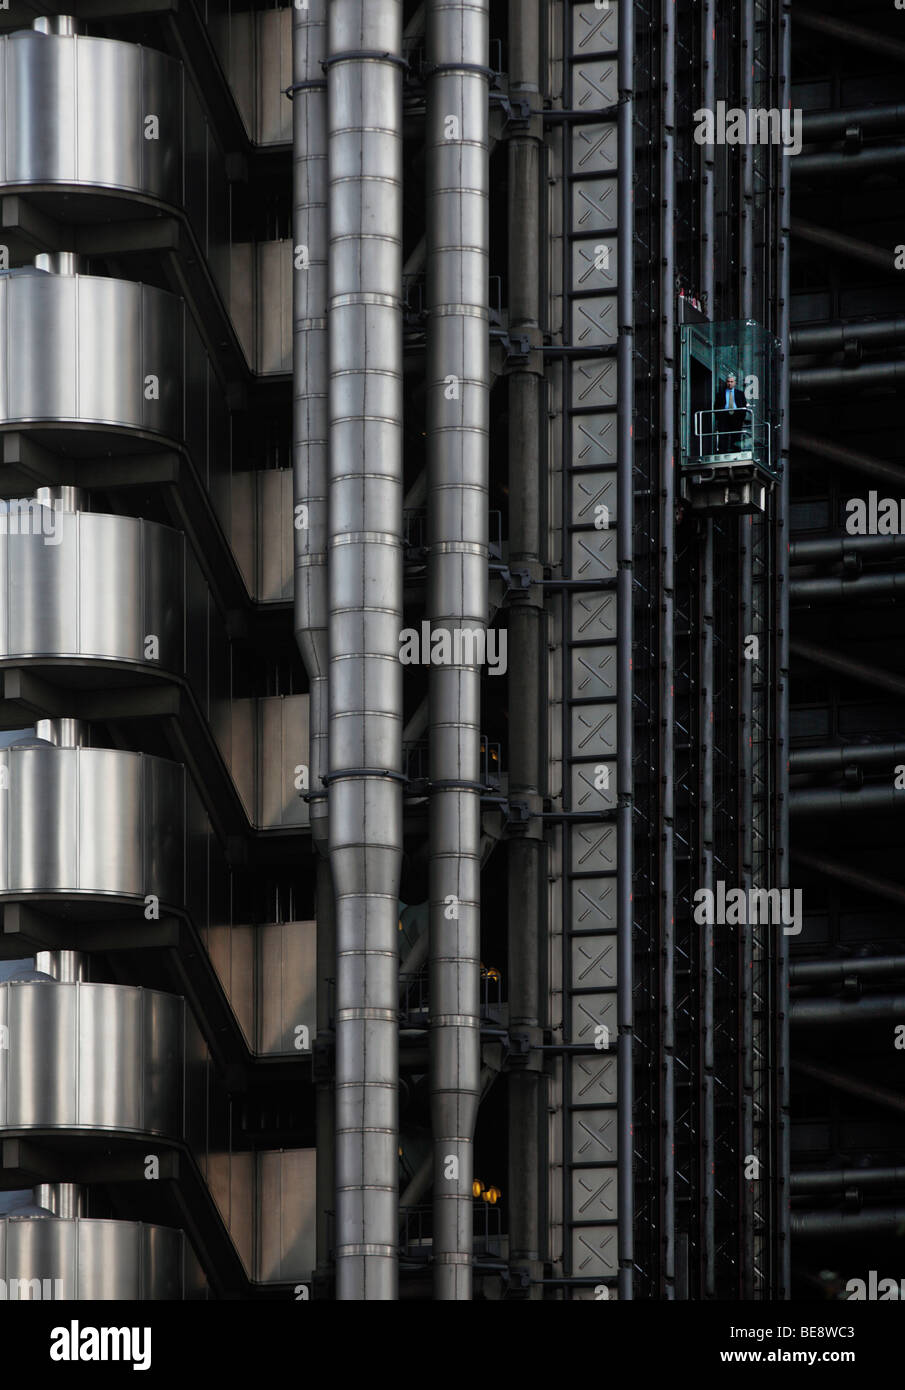 Lloyds building with a man in an elevator, London, England, United Kingdom, Europe Stock Photo